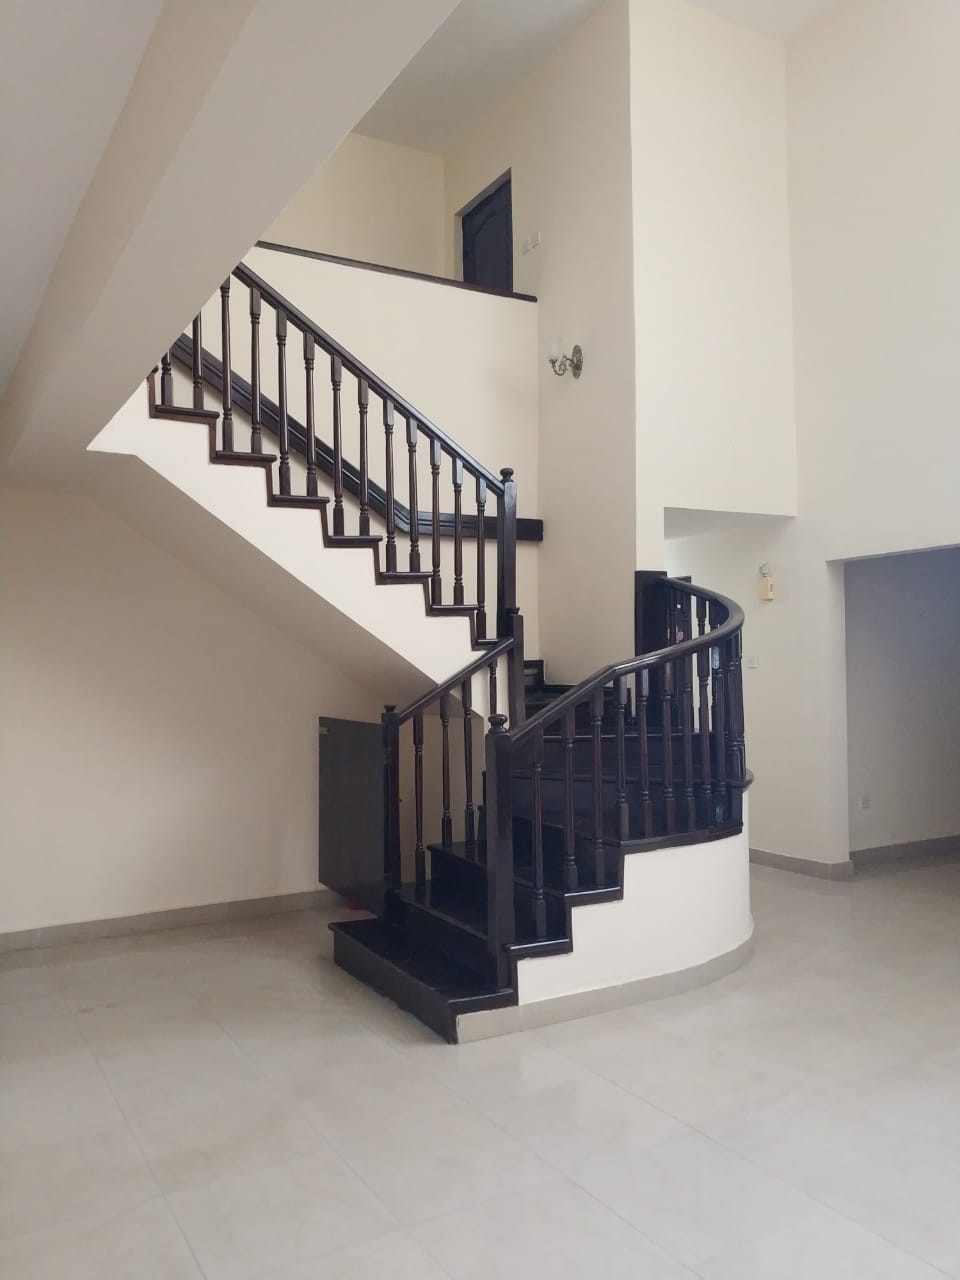 Four 4-Bedroom House for Rent in Gated Community at Cantonments